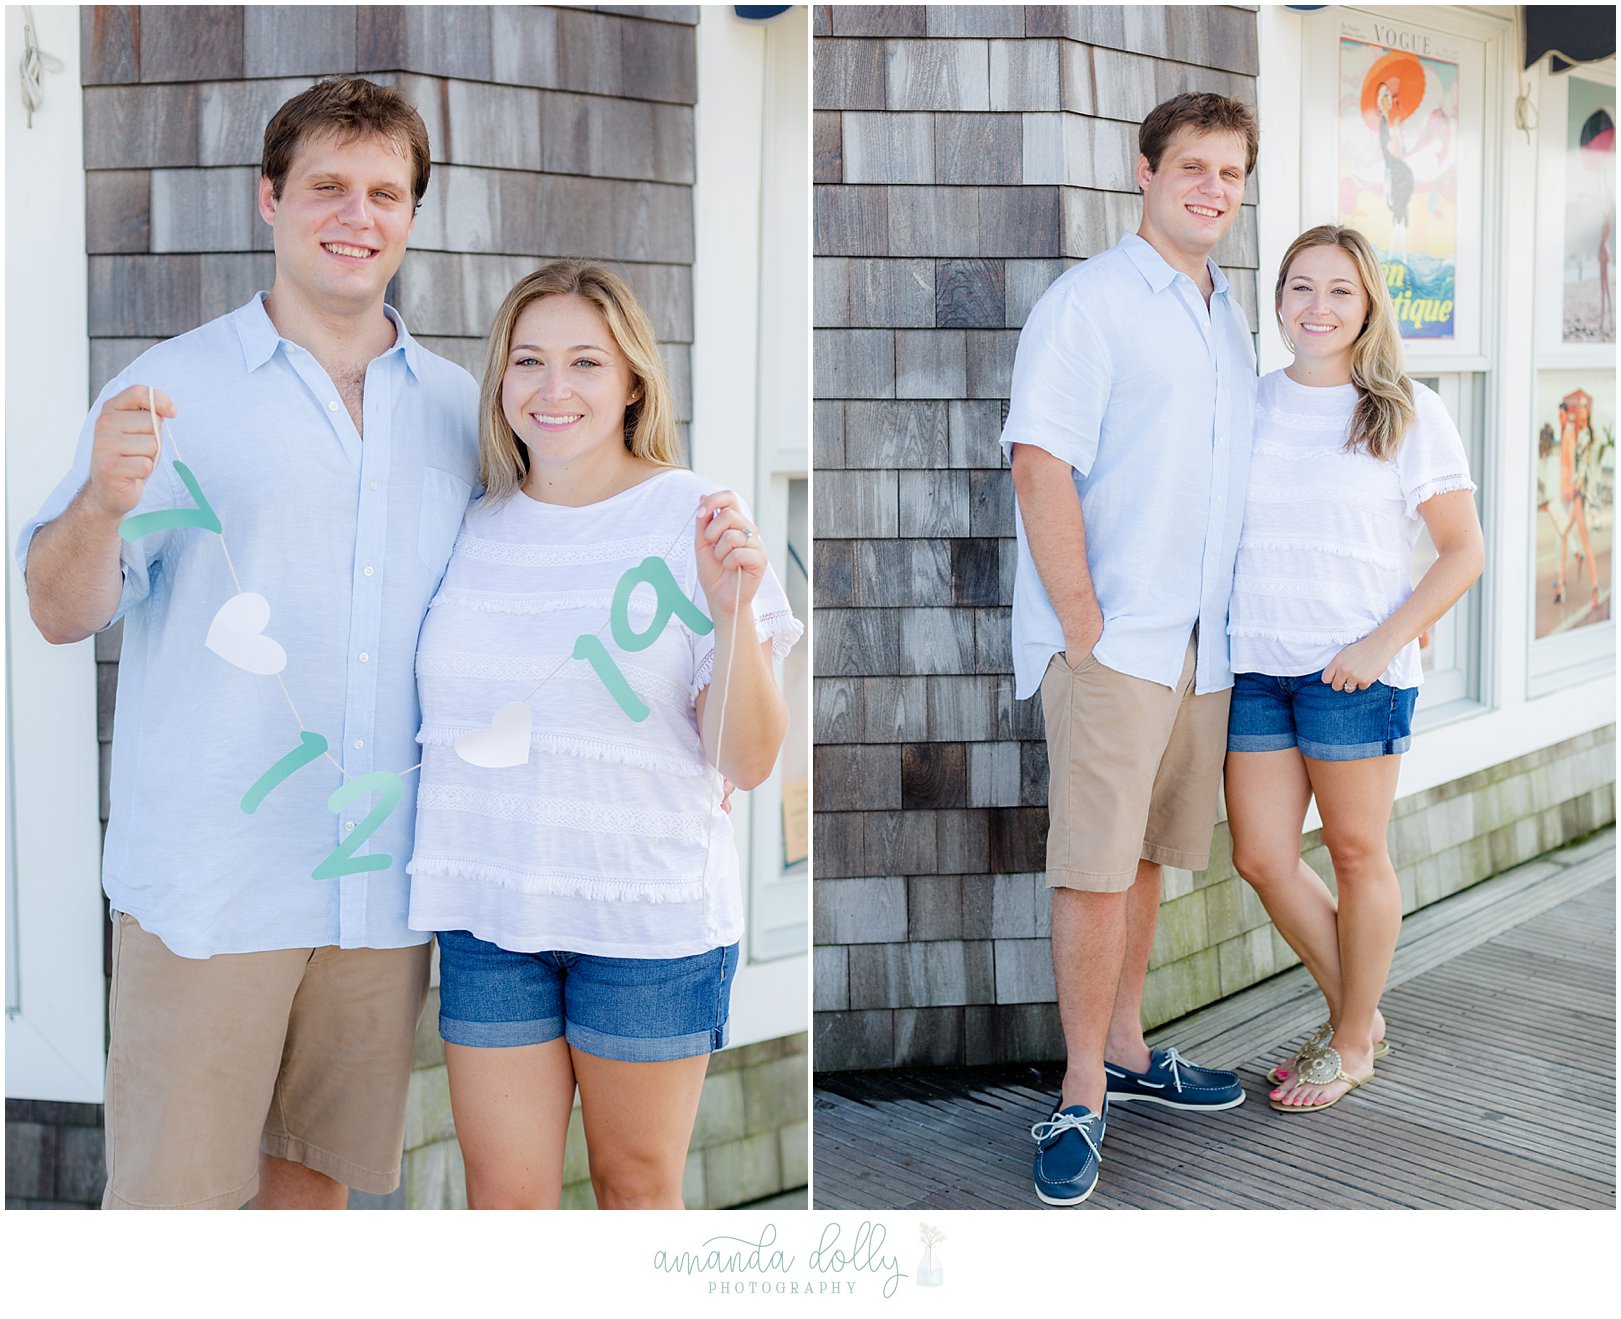 Avon-By-The-Sea NJ Engagement Photography